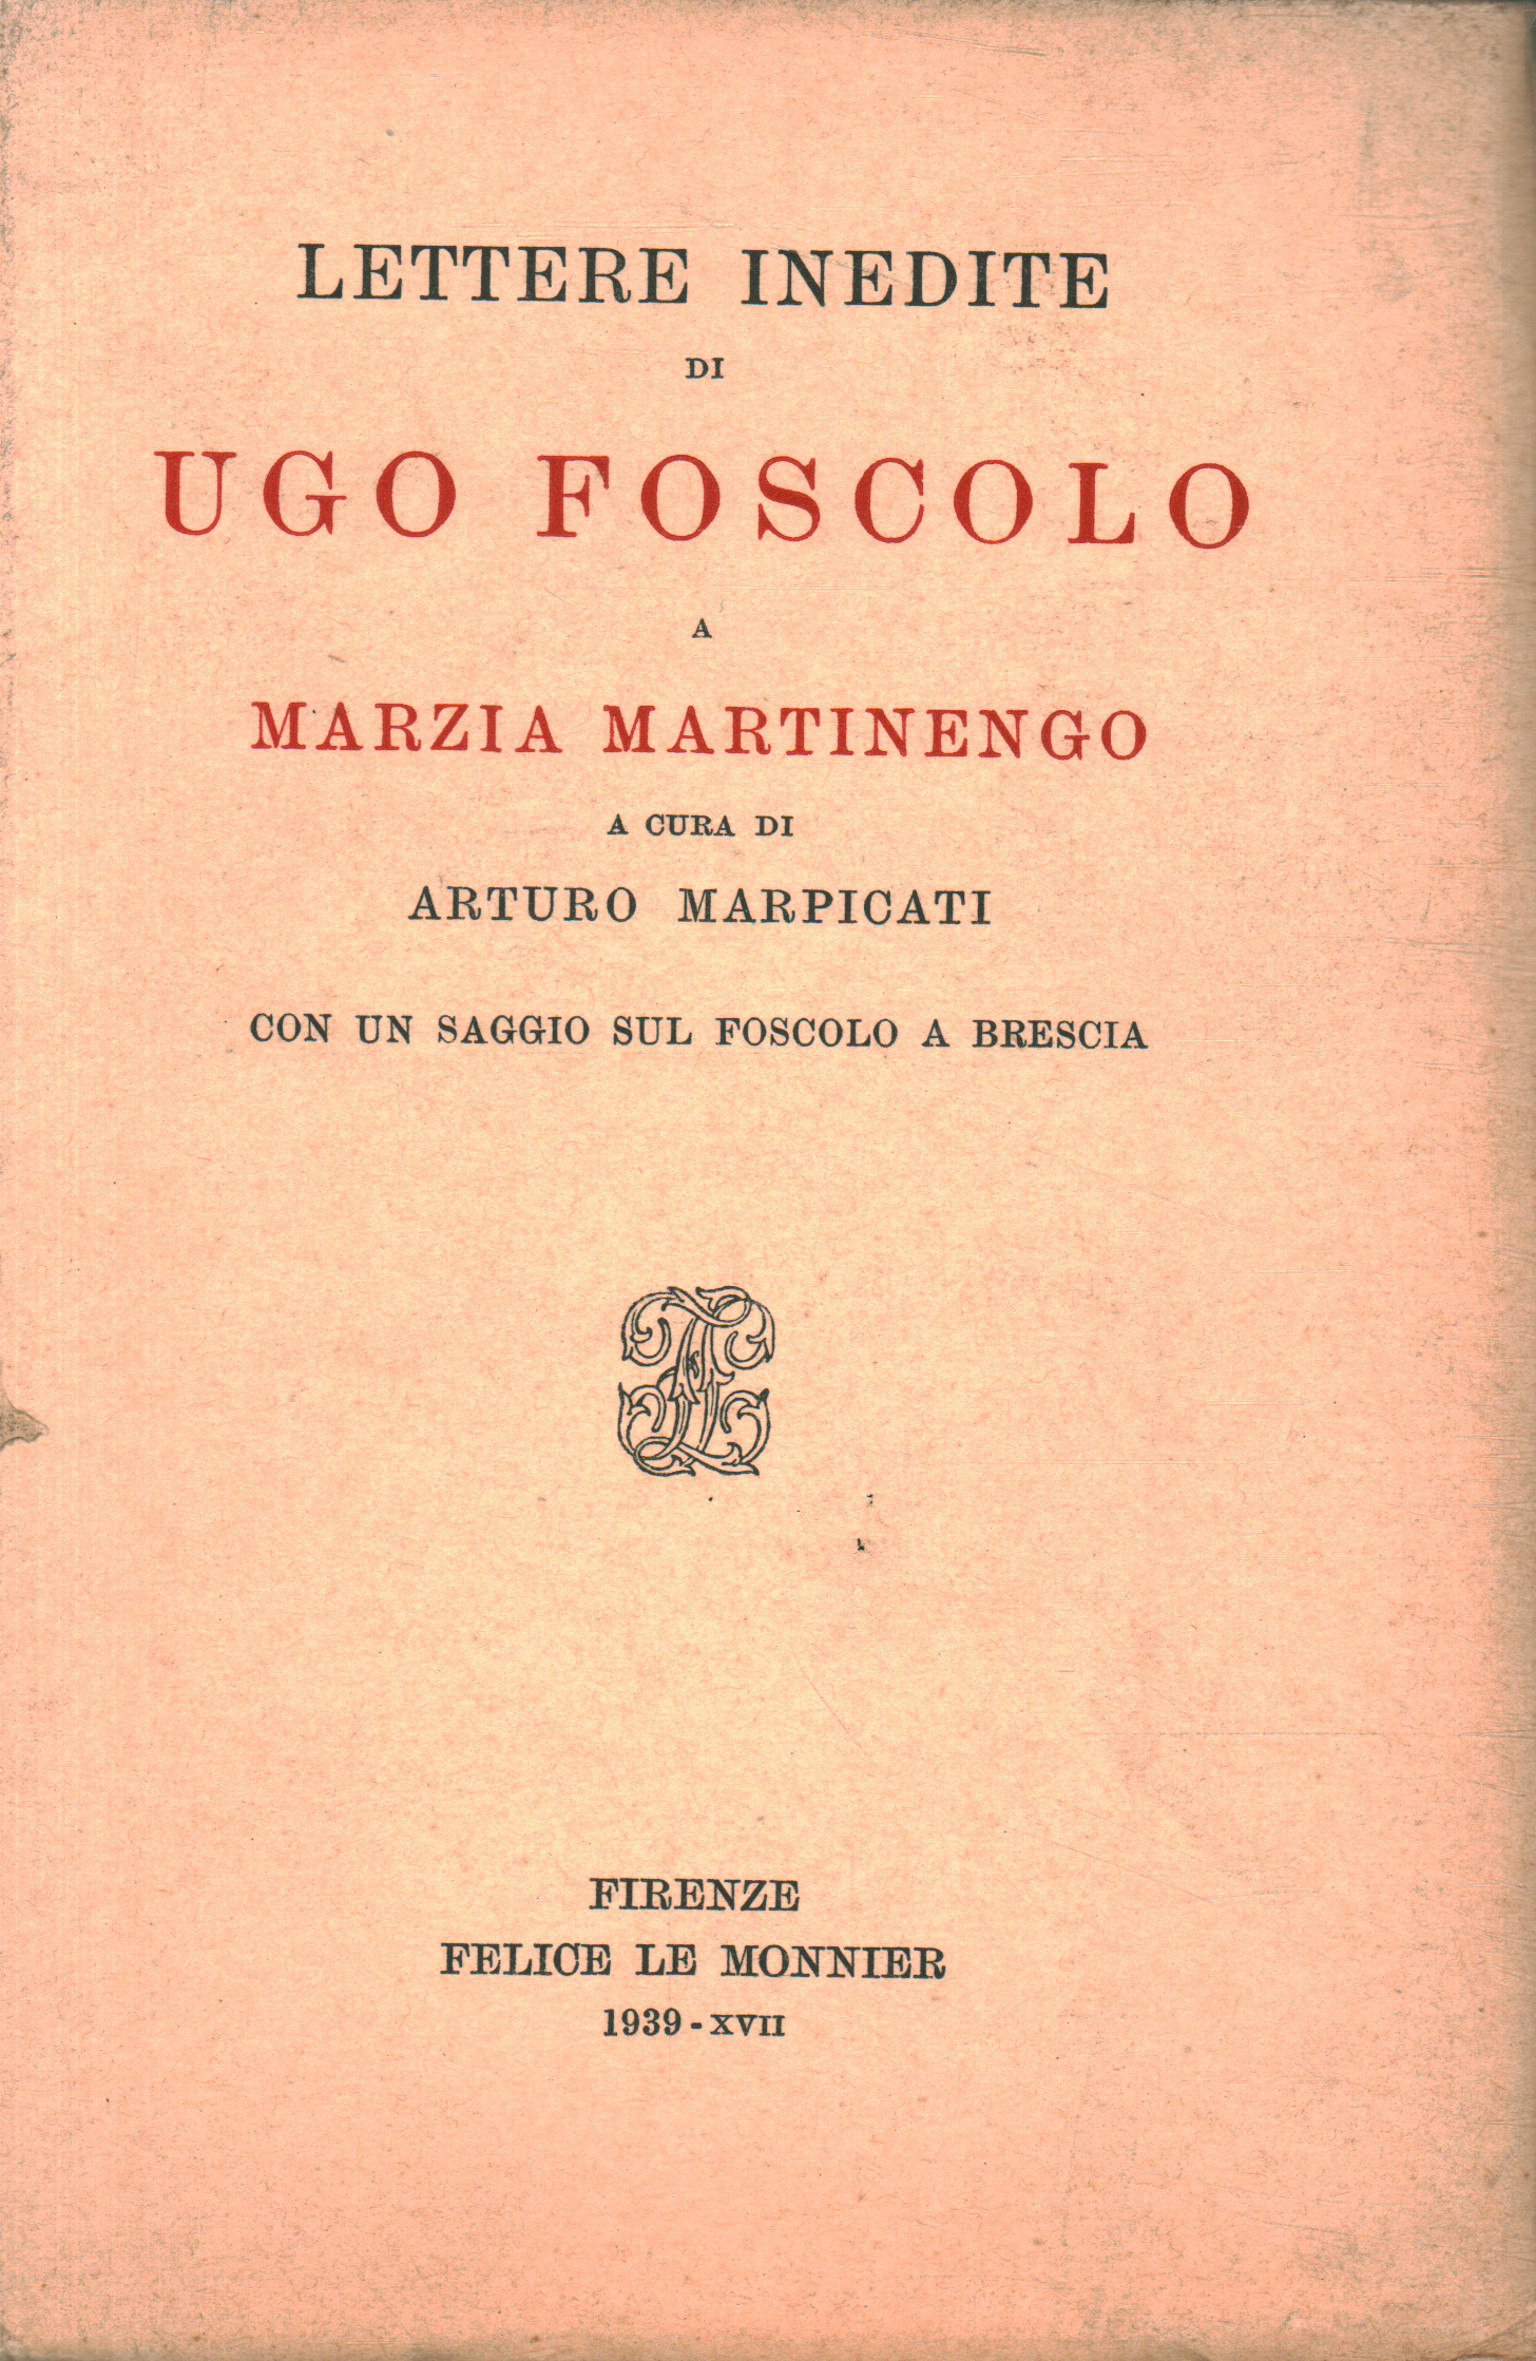 Unpublished letters from Ugo Foscolo to Marzi